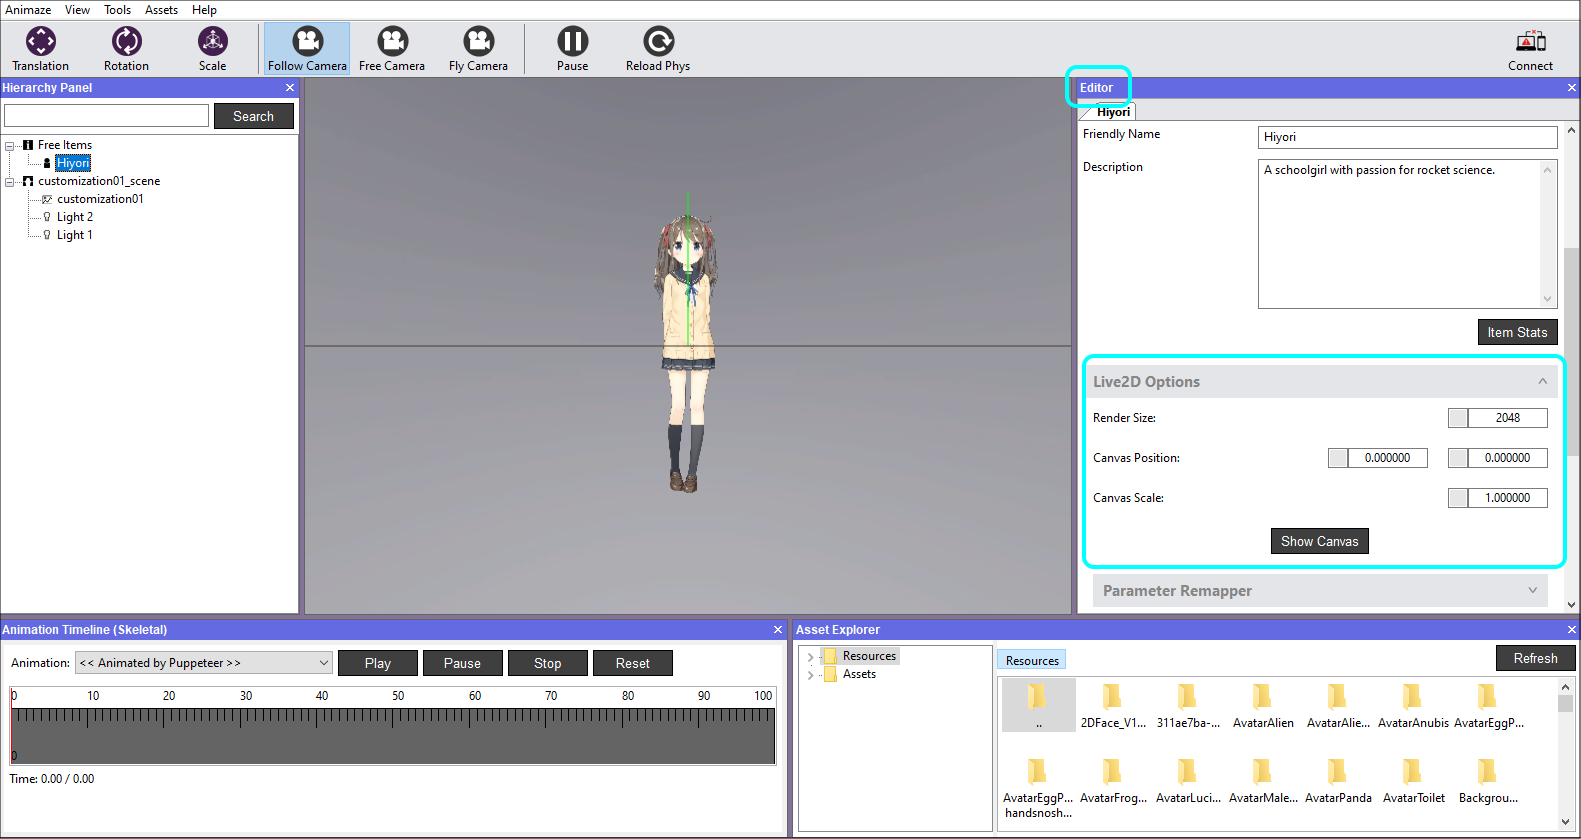 In the Editor Panel scroll down to the Live2D Options and click on it to expand the tab